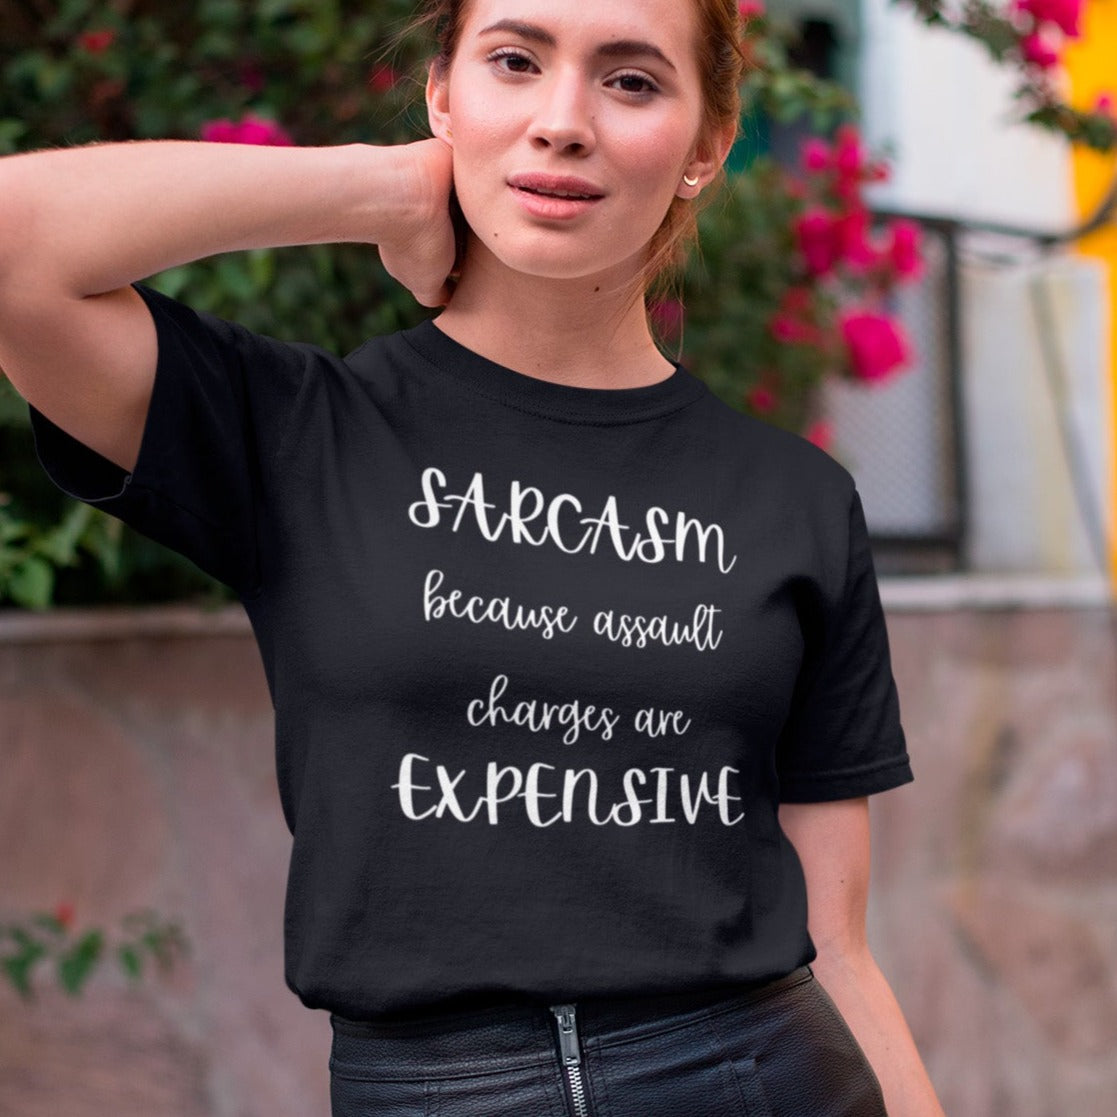 sarcasm-because-assault-charges-are-expensive-black-t-shirt-women-funny-tee-mockup-of-a-girl-in-a-leather-skirt-posing-by-a-street-with-flowers